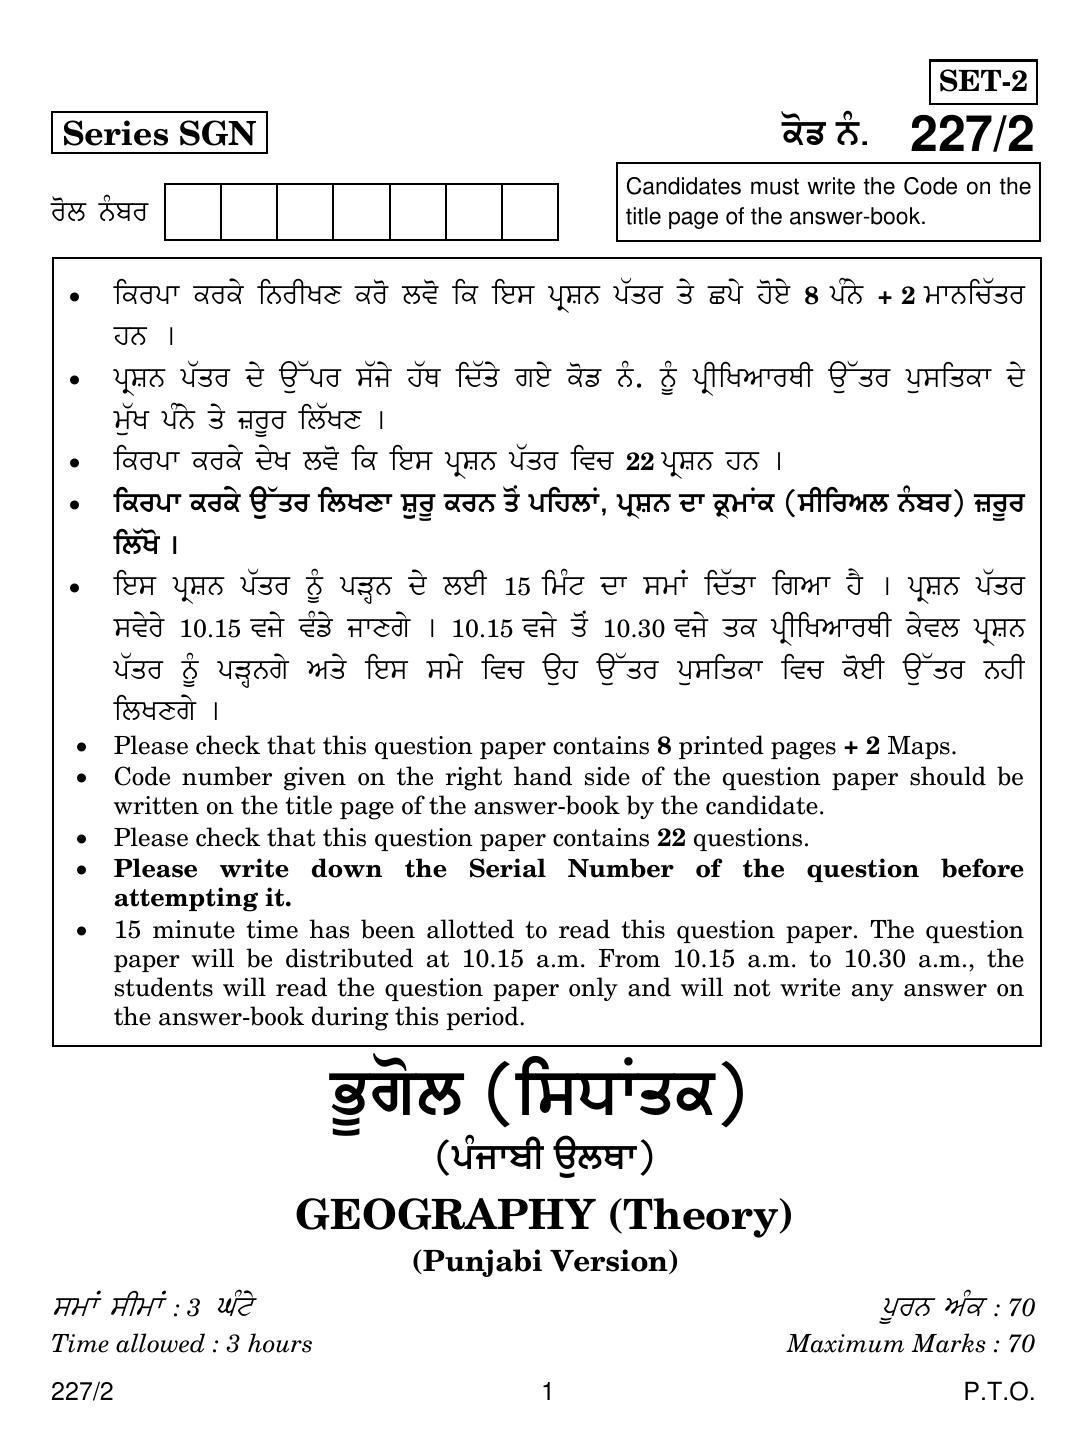 CBSE Class 12 227-2  GEOGRAPHY PUNJABI VERSION 2018 Question Paper - Page 1